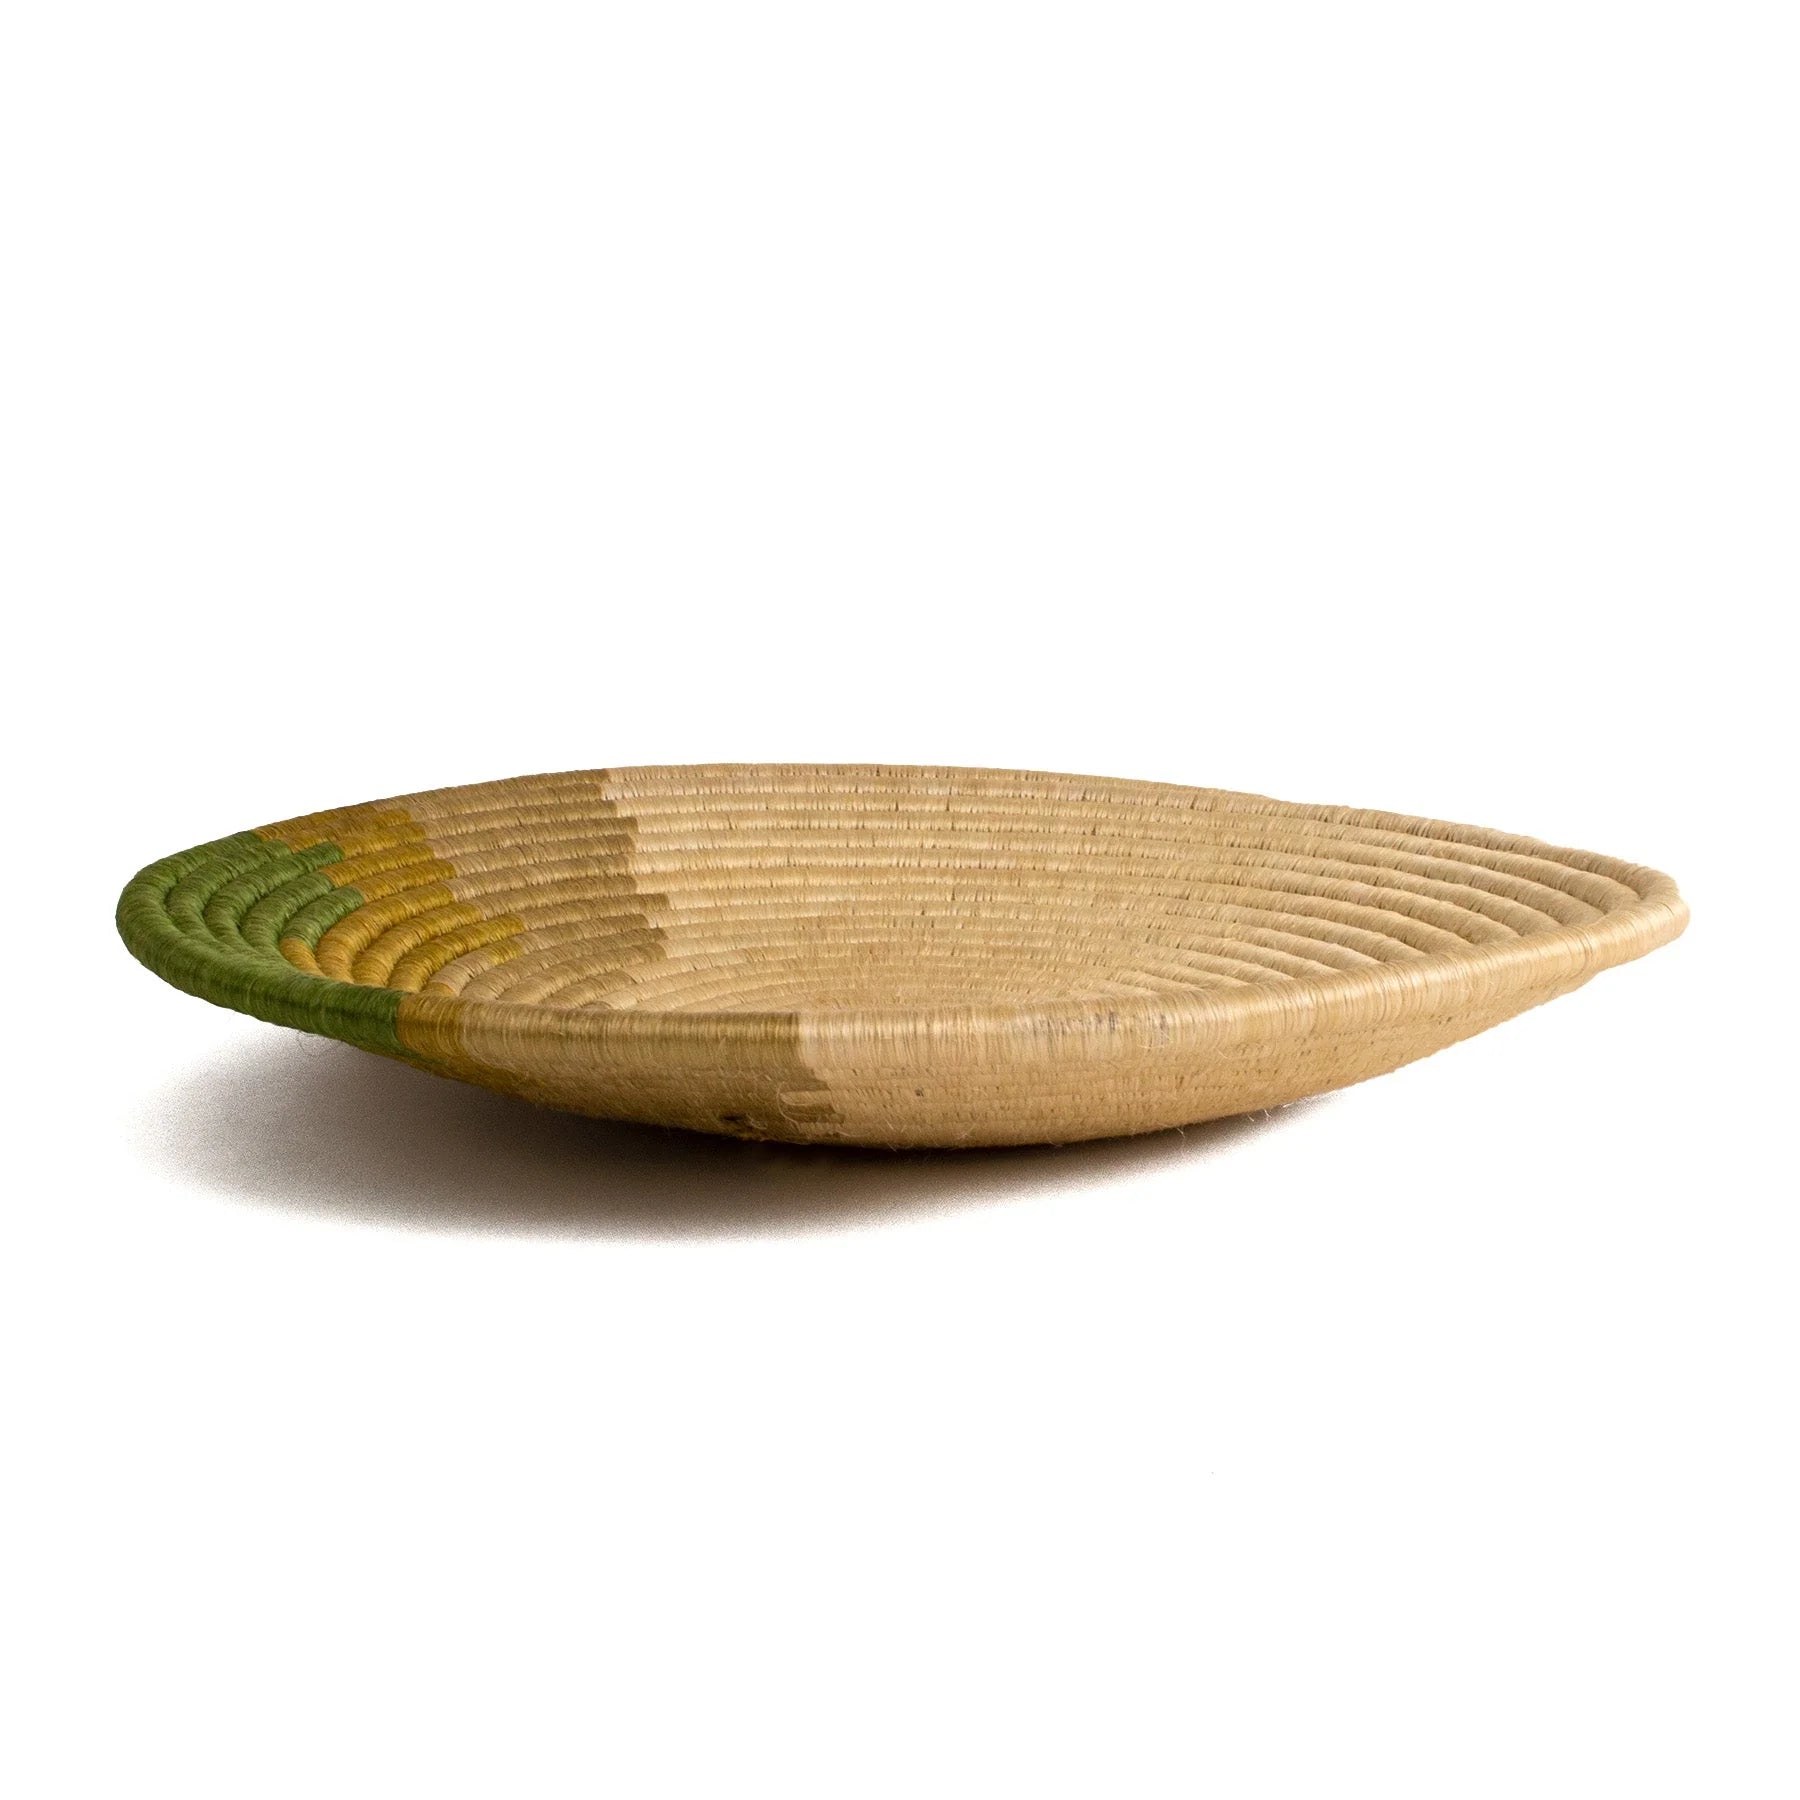 A Restorative Woven Bowl 21&quot; Moss by Kazi Goods, a shallow, oval-shaped woven basket in natural tan color with subtle green accents radiating outward from the center is showcased against a plain white background. This piece reflects the tranquil aesthetic of a Scottsdale Arizona bungalow.